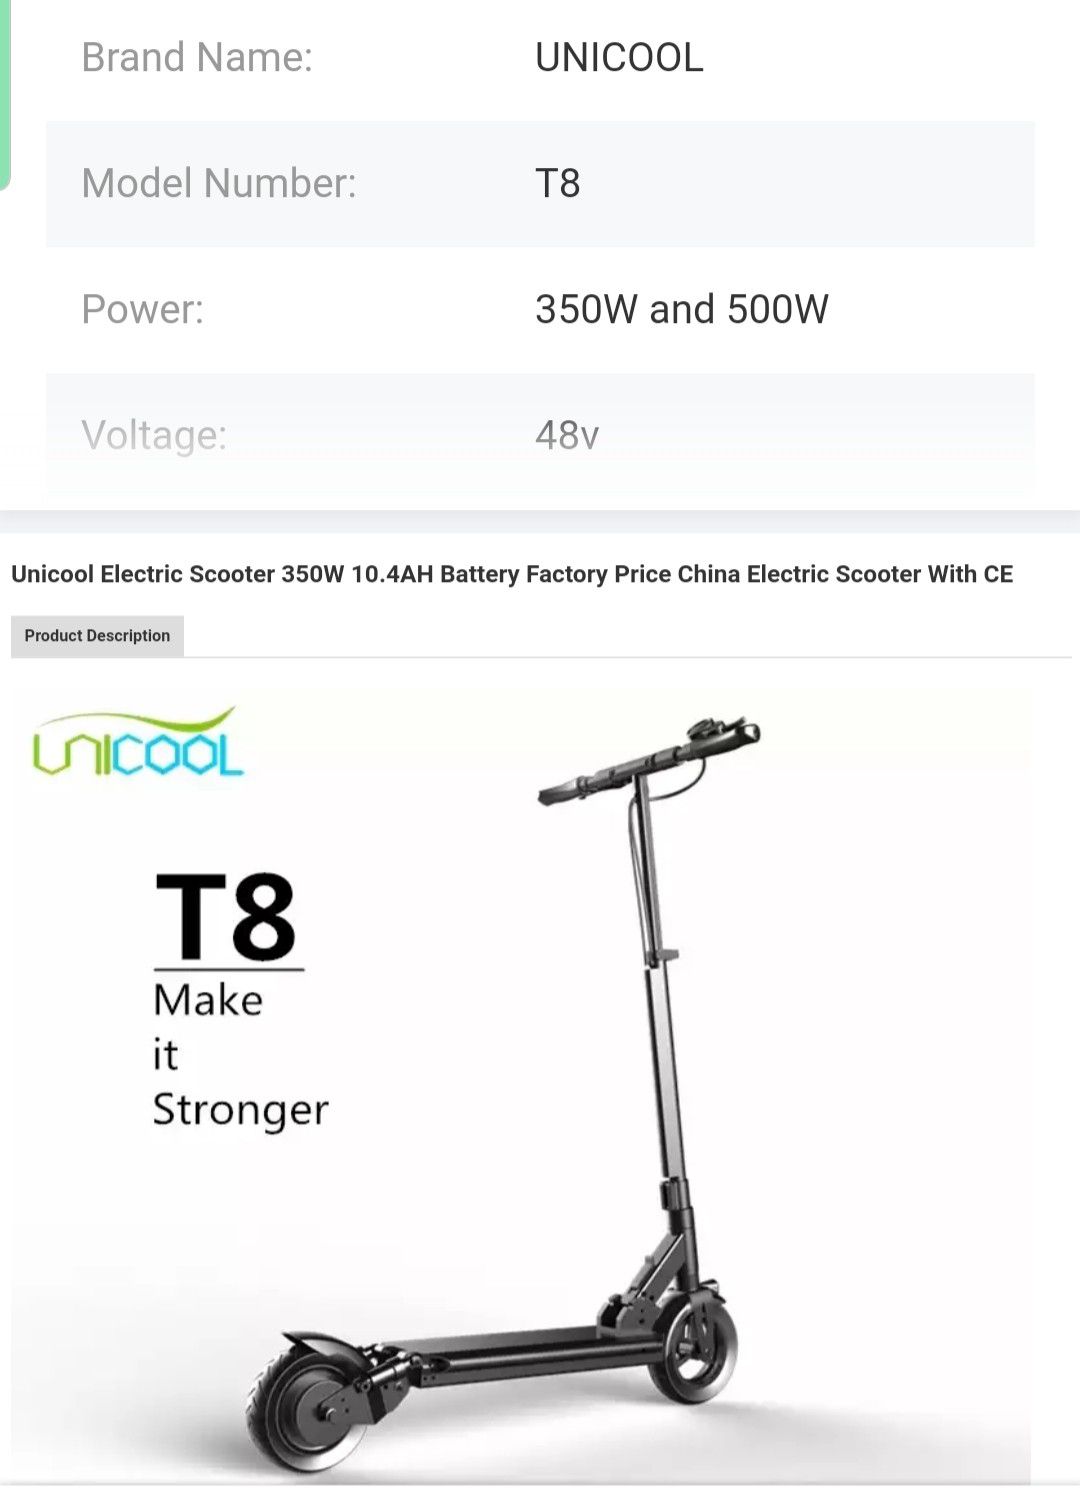 UNICOOL T8 ELECTRIC SCOOTER for in Queens, NY - OfferUp